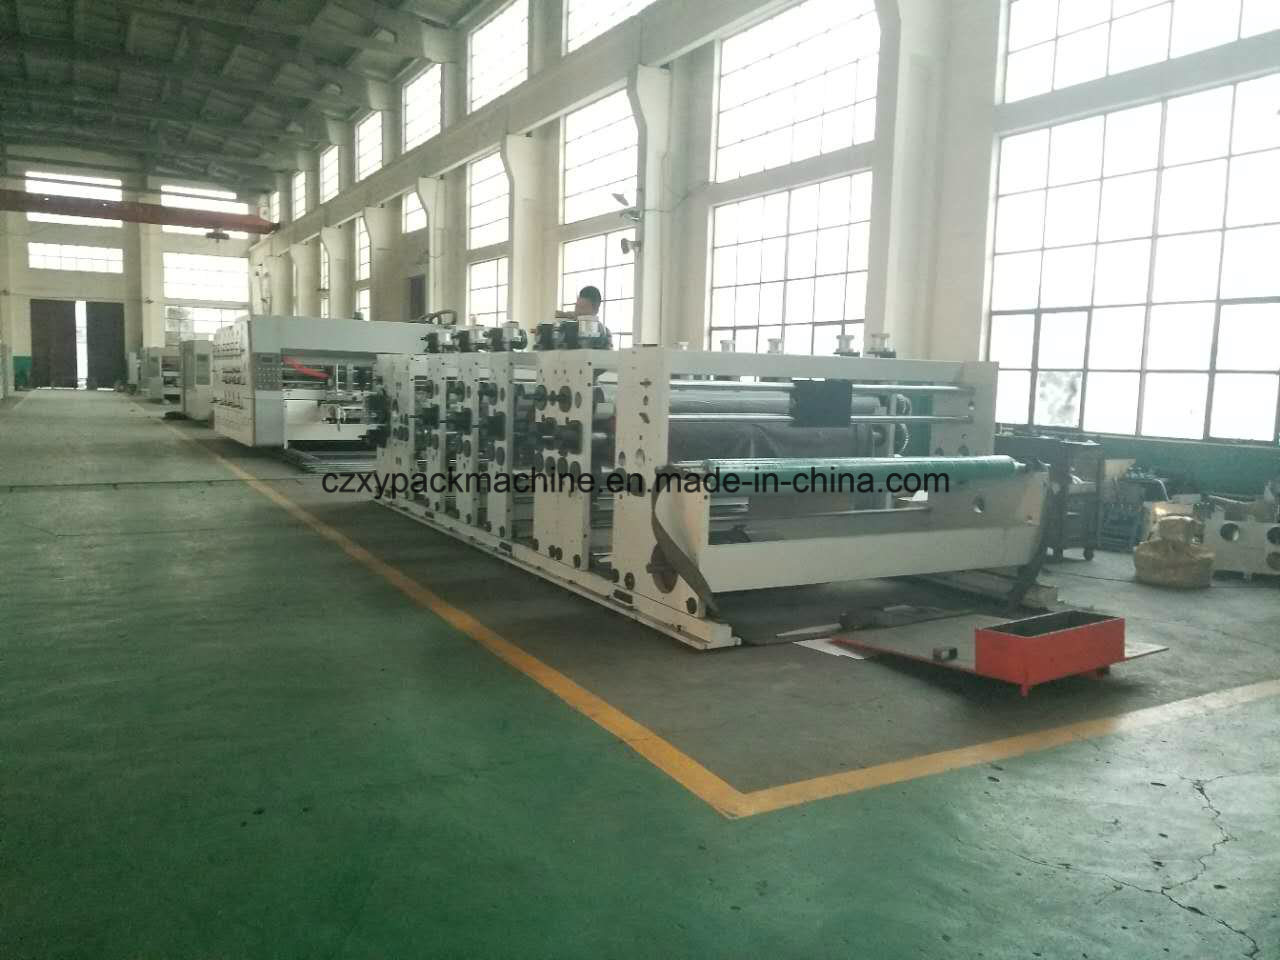 2018 Hot Sale Vacuum Transfer High Definition Six Color Printing Slotting Die Cutting Machine